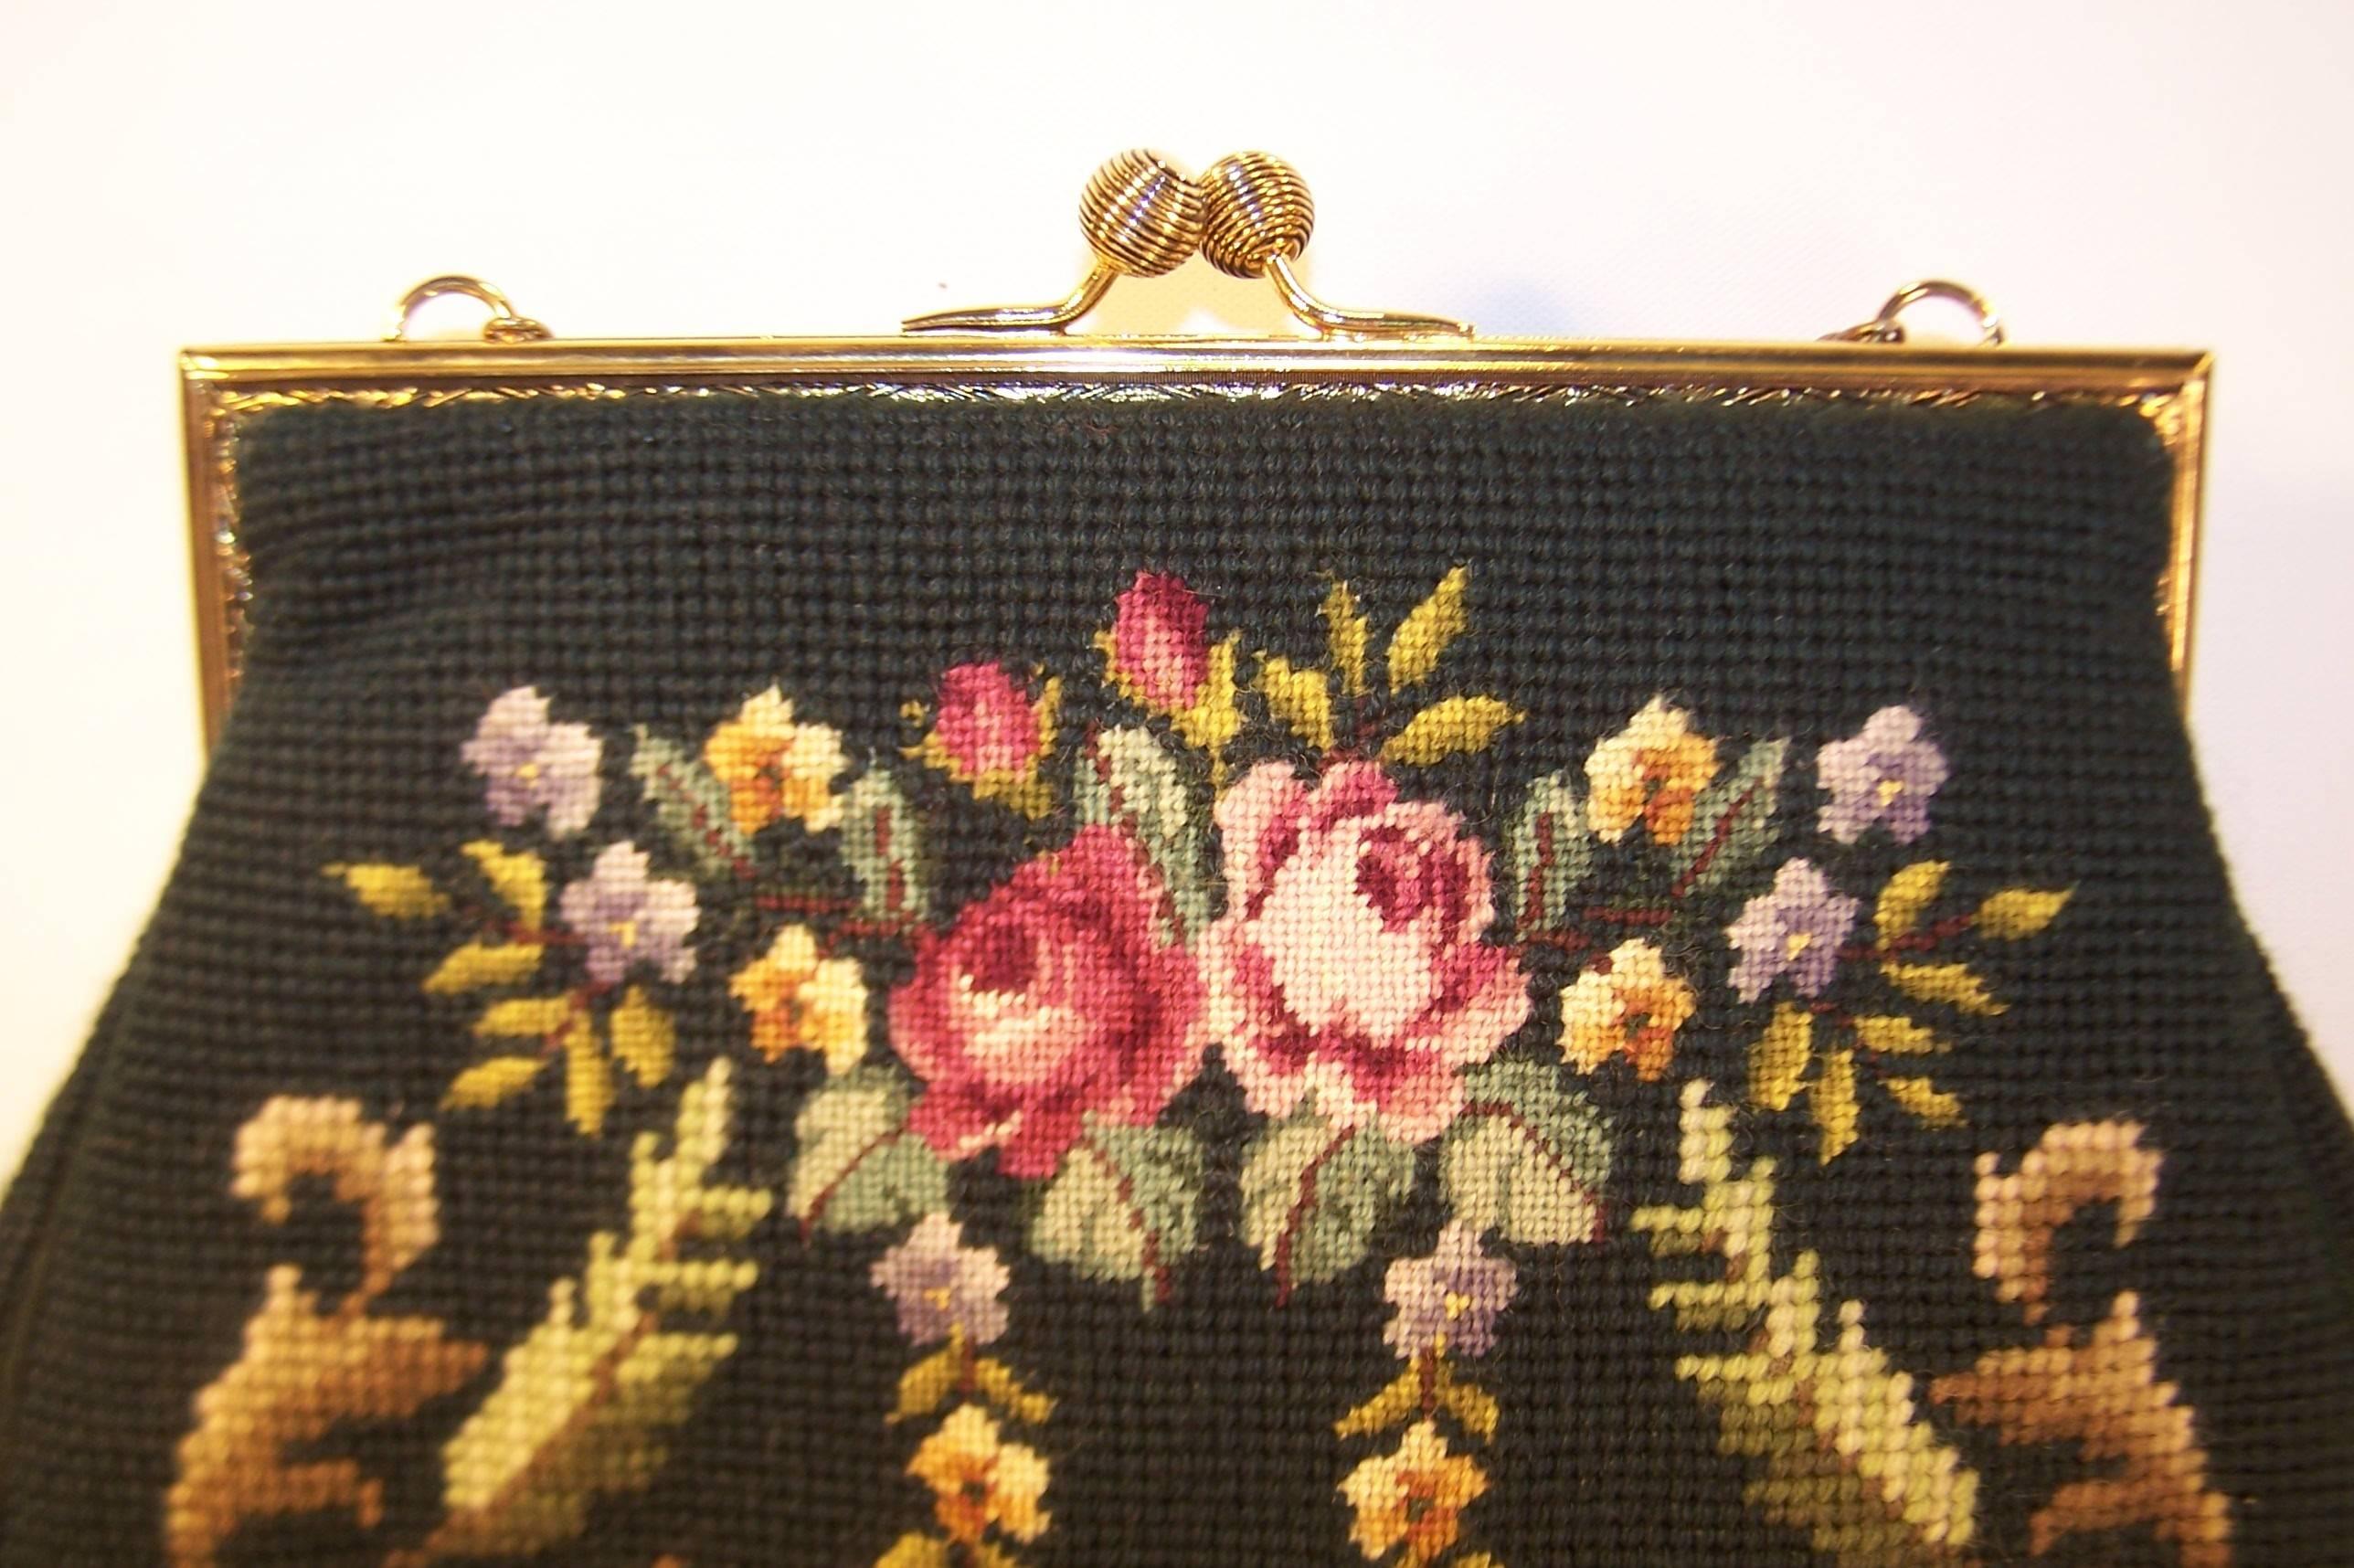 Women's 1950's Green Needlepoint Handbag With Floral Motif & Chain Handle